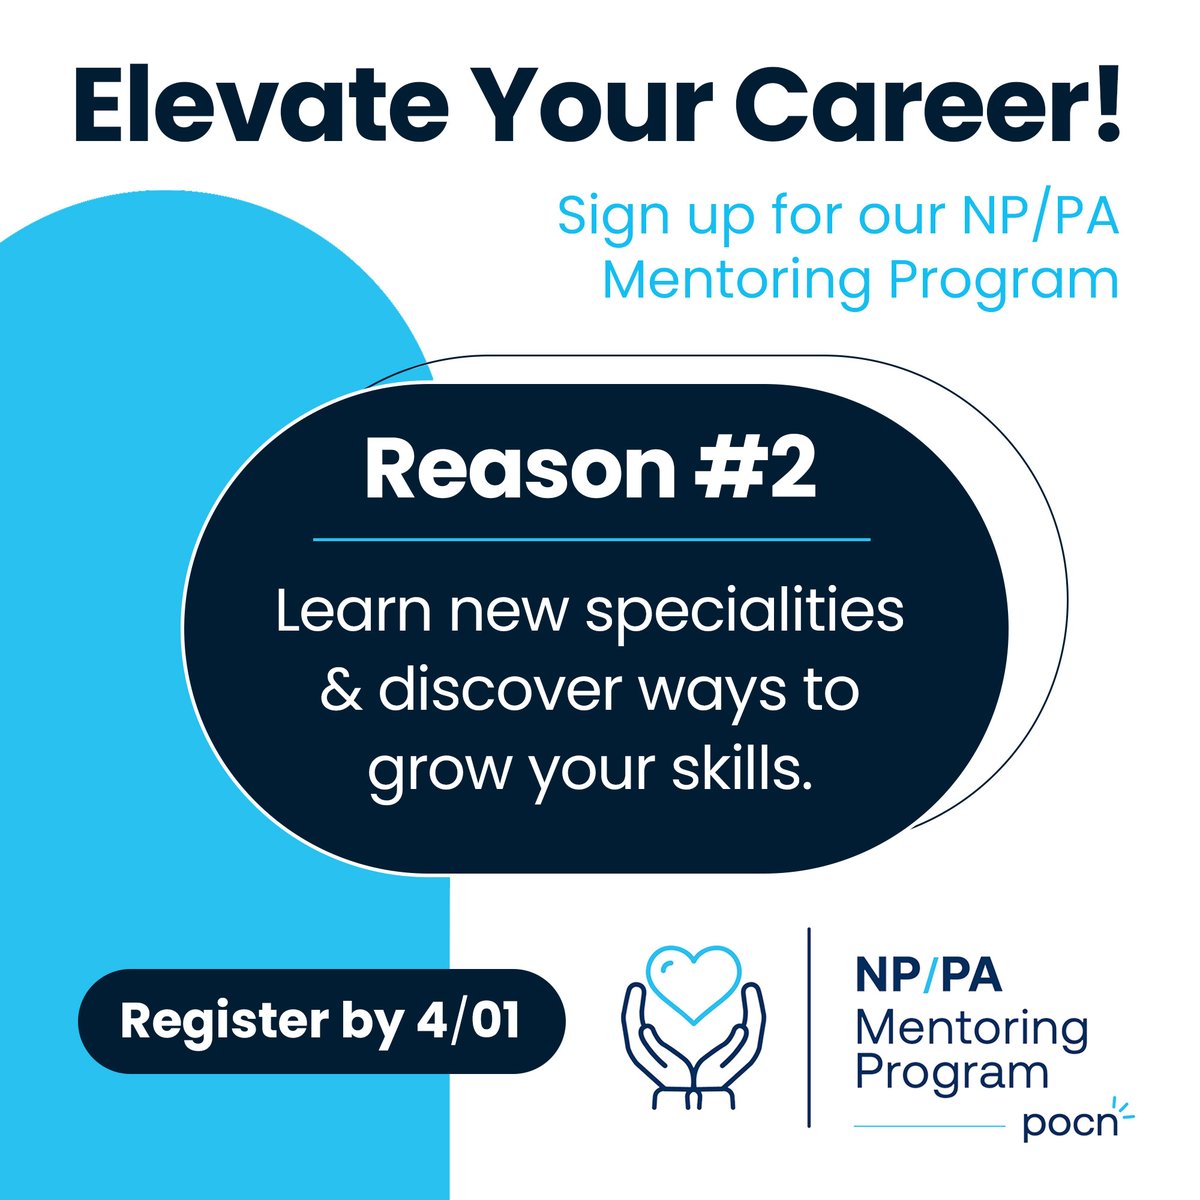 Elevate your NP/PA career with our #Mentorship Program! Set goals, get peer feedback, and succeed in your aspirations with one-on-one mentorship sessions. Ready to chart your path with confidence? Register now: tinyurl.com/mr24shyn #CareerAdvancement #NPS #physicianassociates